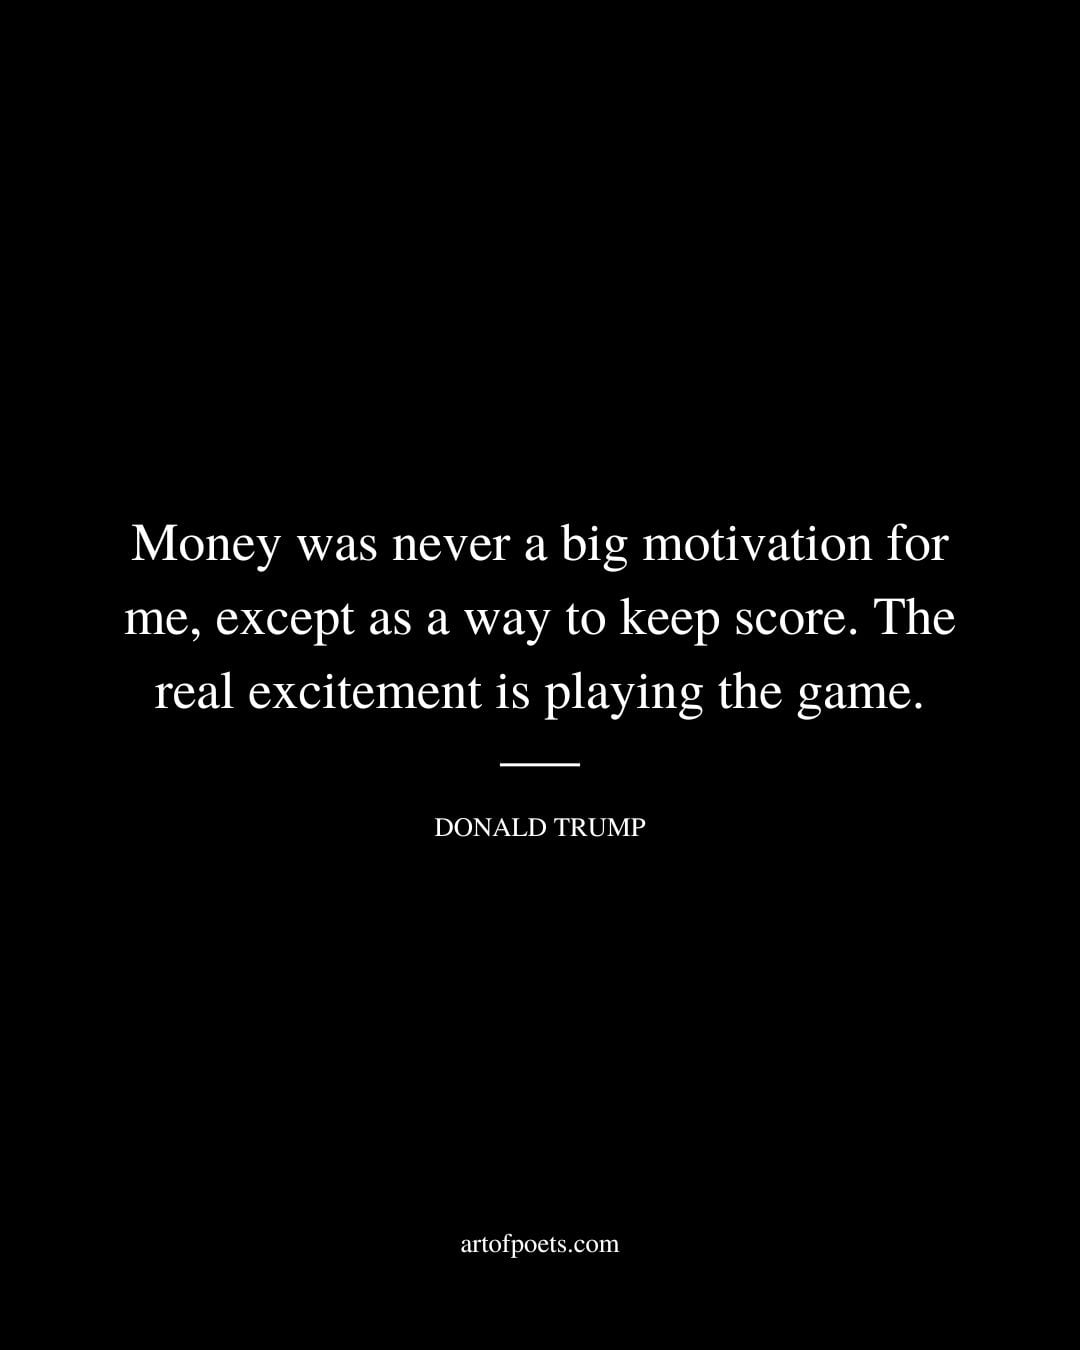 Money was never a big motivation for me except as a way to keep score. The real excitement is playing the game